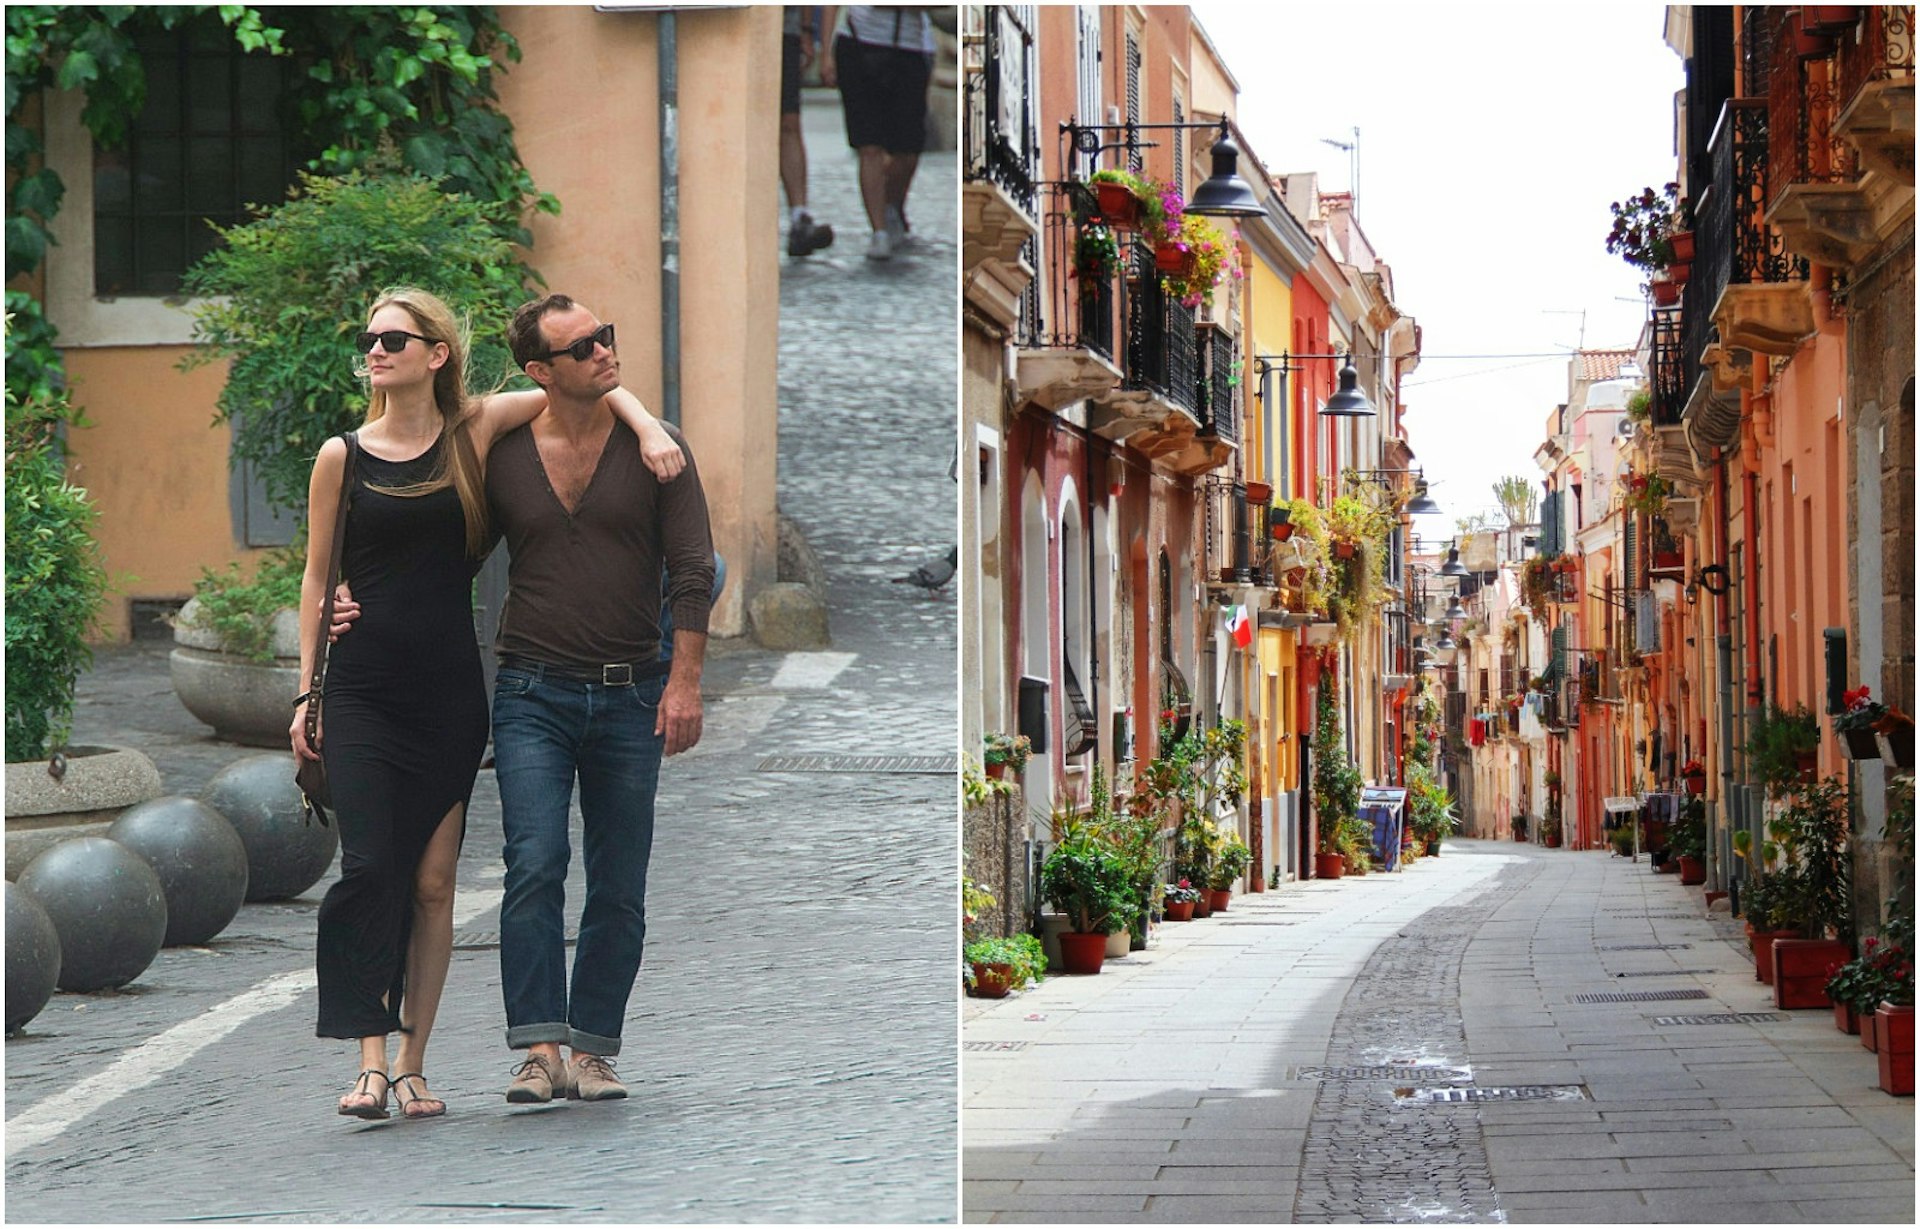 Left to right: Jude Law and Phillipa Coan walk down a cobbled street with their arms around each other; a picturesque Italian street lined with houses of different colours and juliette balconies.